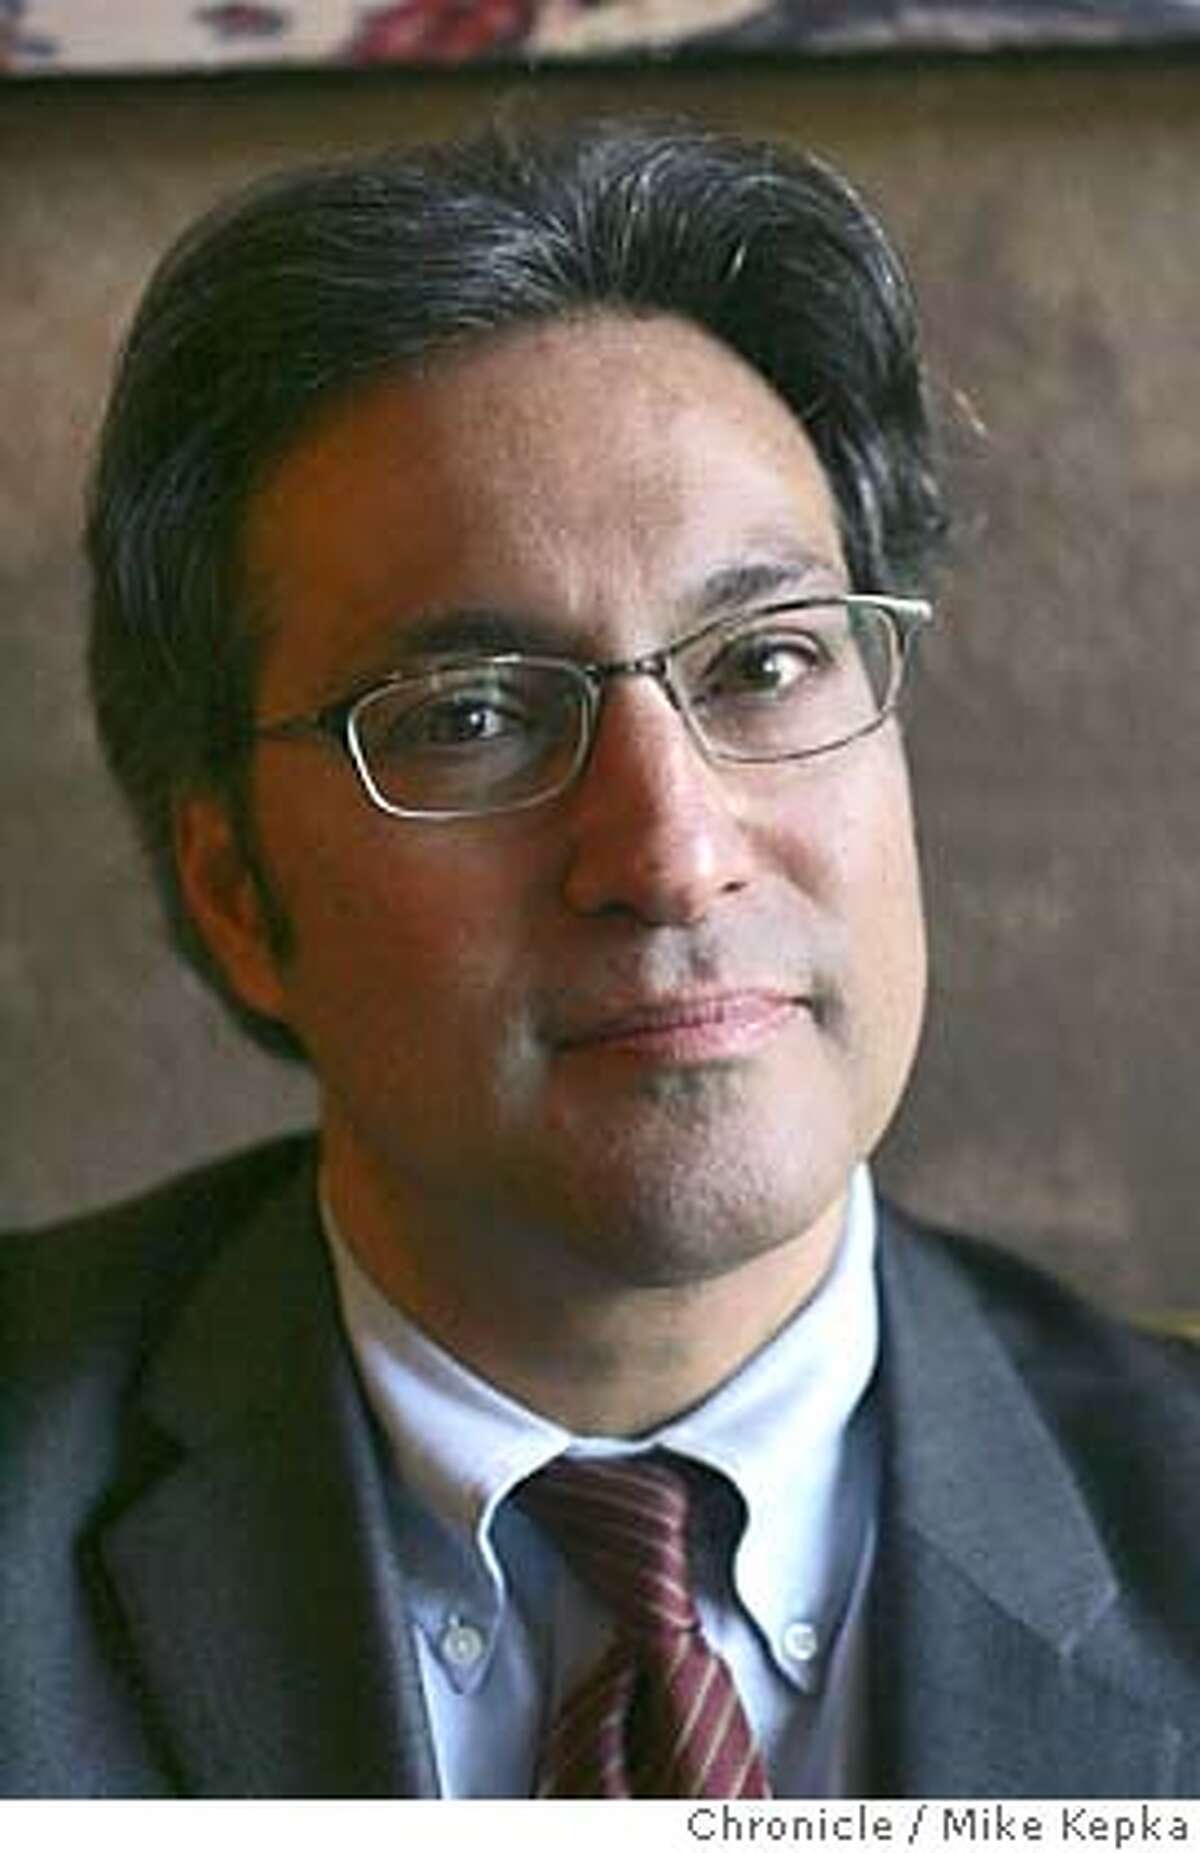 ross08089_mk.jpg Ross Mirkarimi at his District 5 neighborhood hangout, Cafe Abir. Mirkarimi will be sworn in as a new District 5 Supervisor Friday. 1/7/05 Mike Kepka/The Chronicle Ran on: 01-08-2005 Ross Mirkarimi worked for both Terence Hallinan and Matt Gonzalez. MANADATORY CREDIT FOR PHOTOG AND SF CHRONICLE/ -MAGS OUT